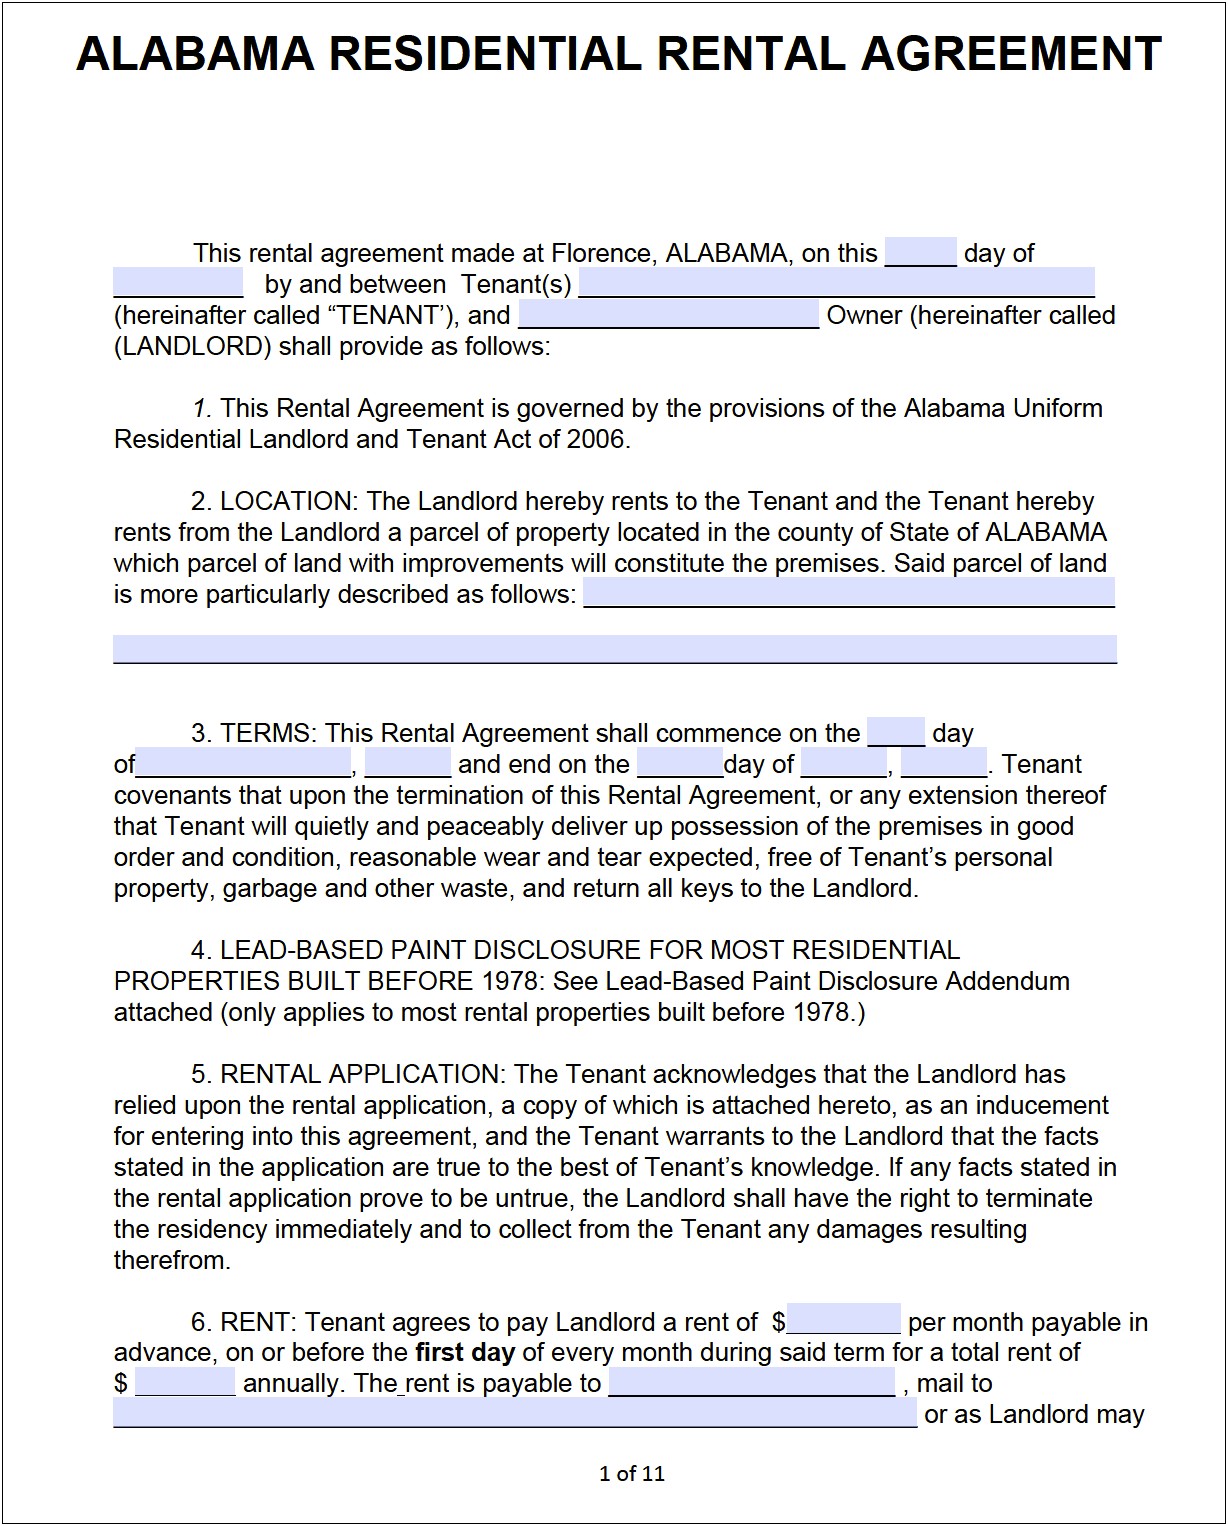 Free Printable Rental Property Lease Agreement Template